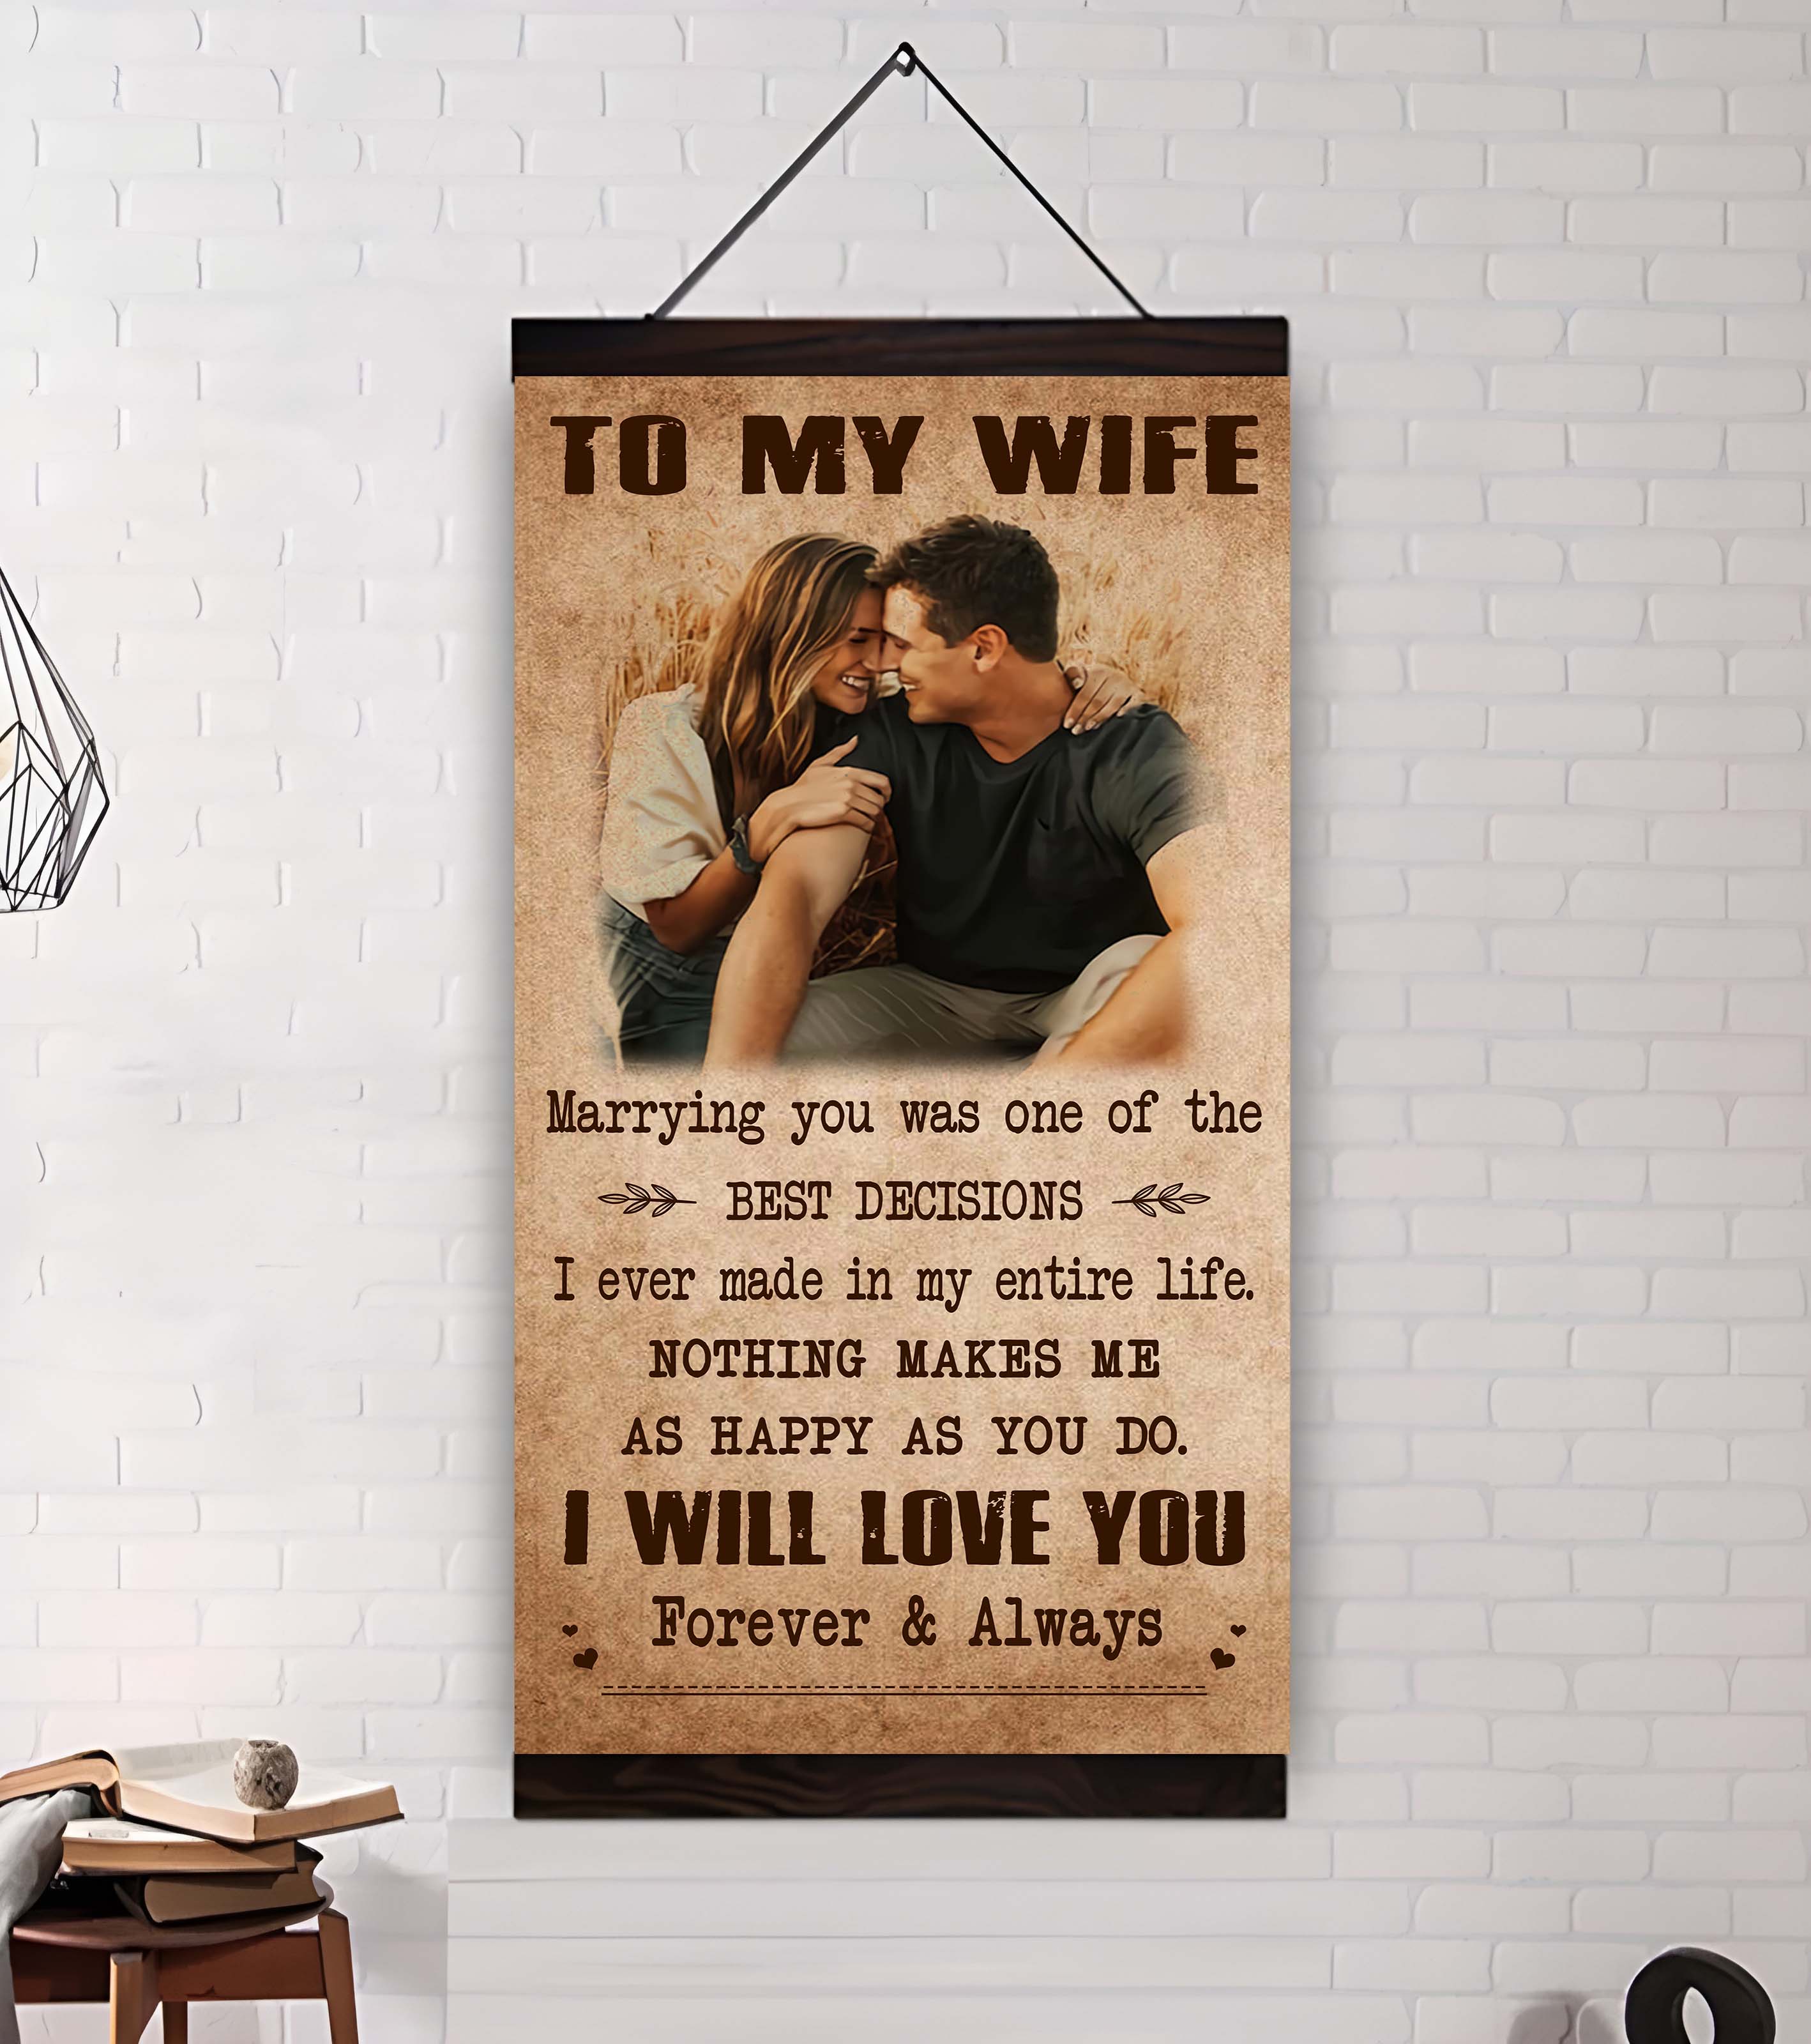 Valentine gifts-Custom image canvas-Husband to Wife- You are braver than you believe